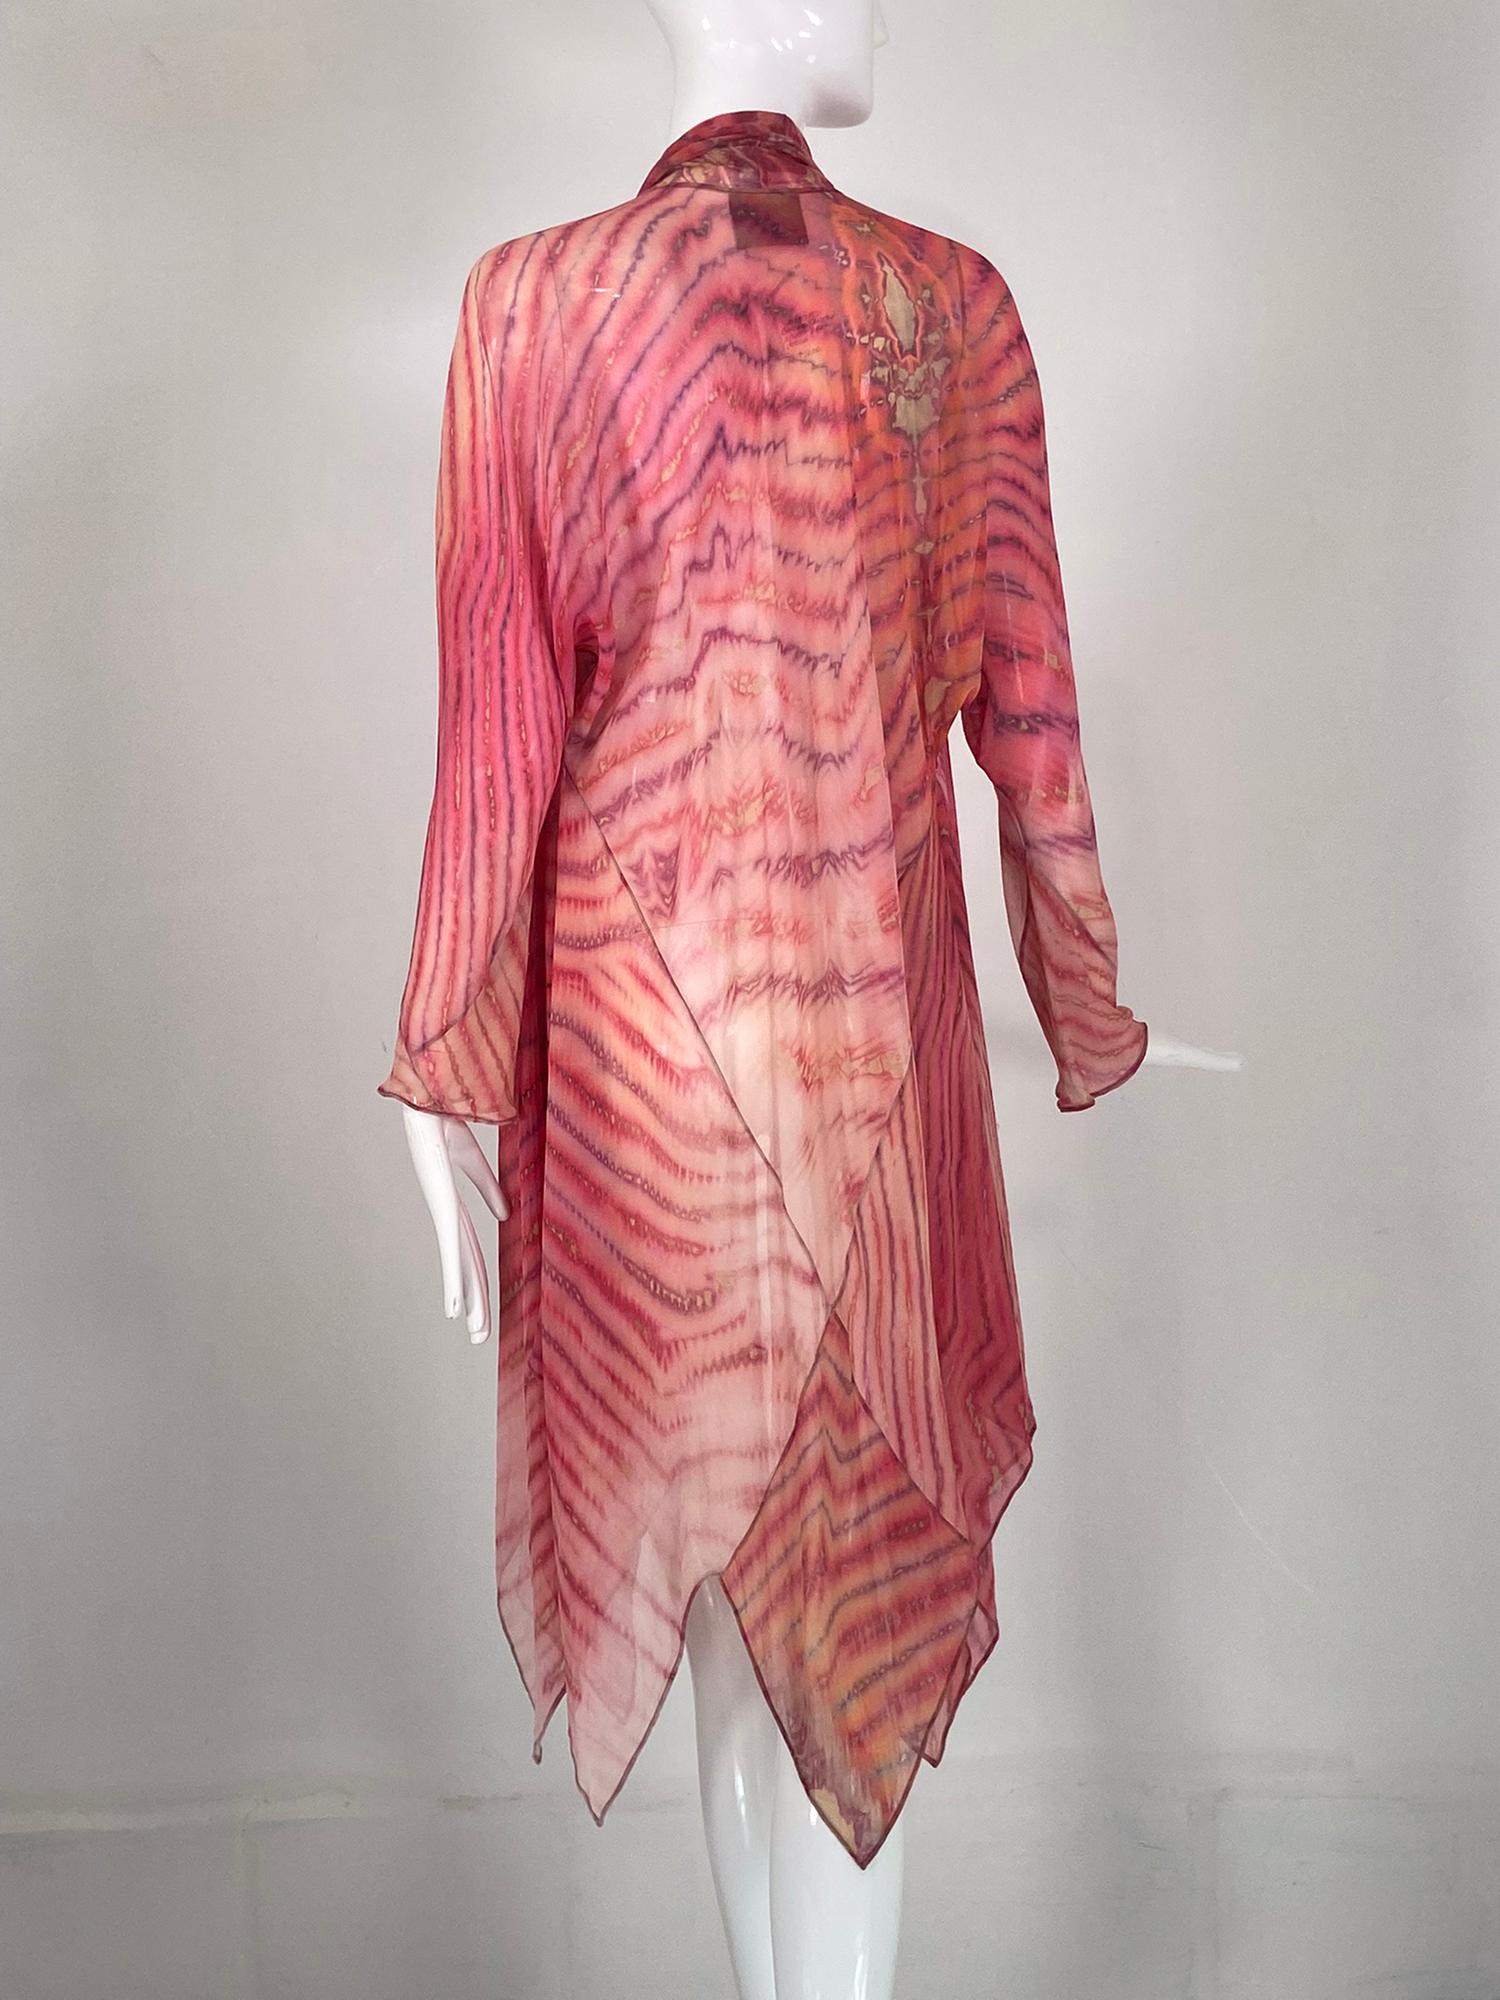 Carter Smith Silk Crepe Shibori Bias Cut Tie Front Coat  In Good Condition For Sale In West Palm Beach, FL